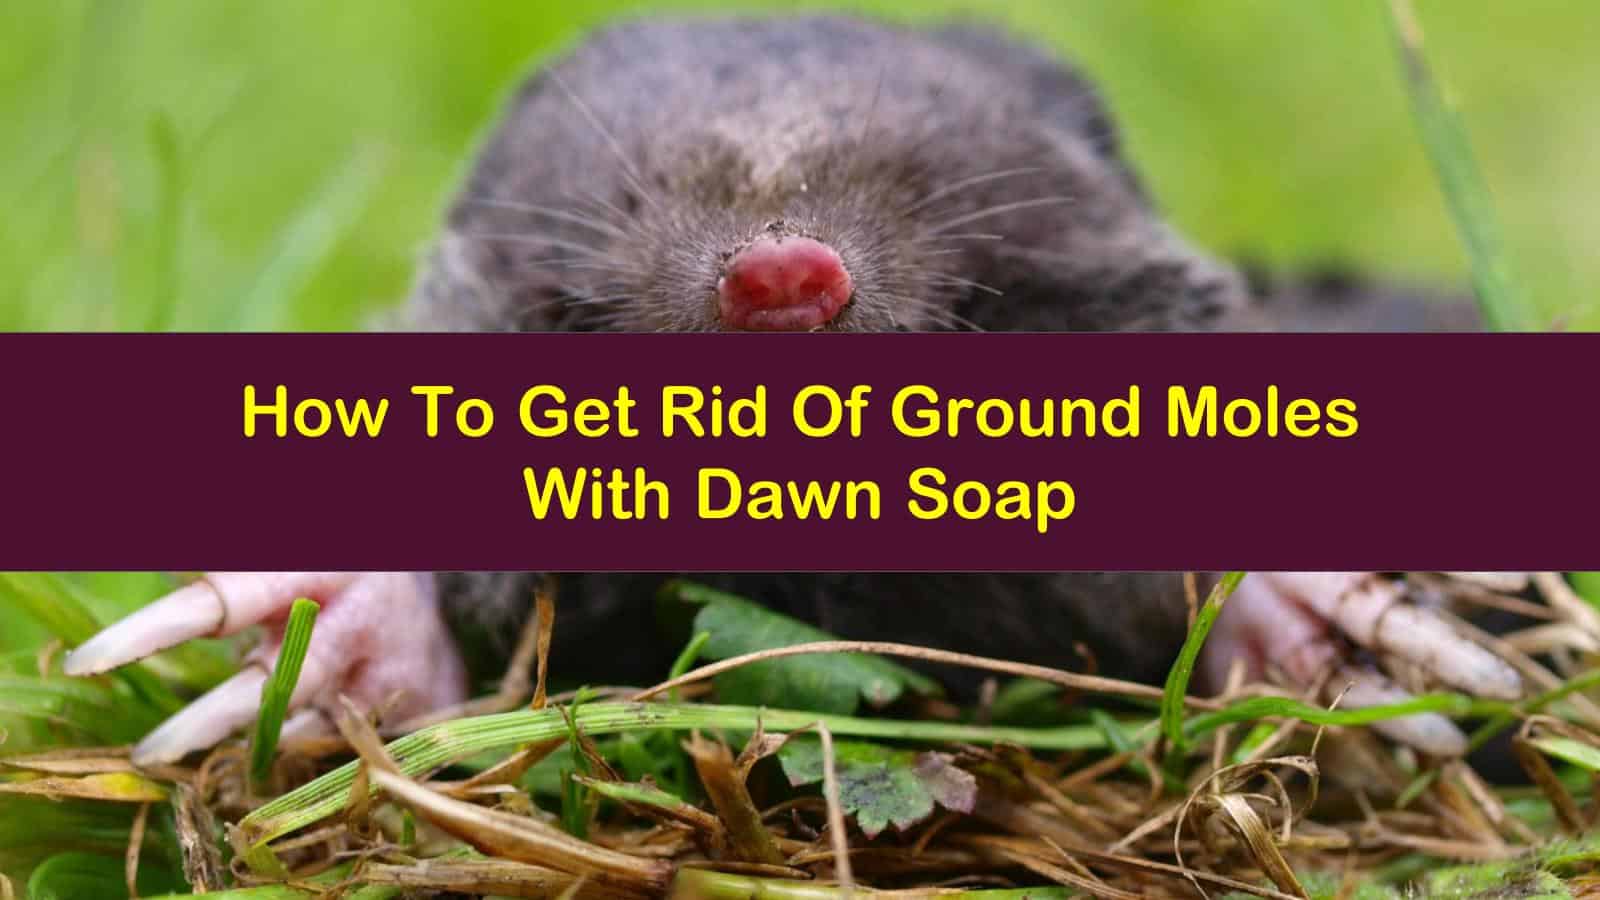 How To Get Rid Of Ground Moles With Dawn Soap - How To Get Rid Of Moles In Your Yard